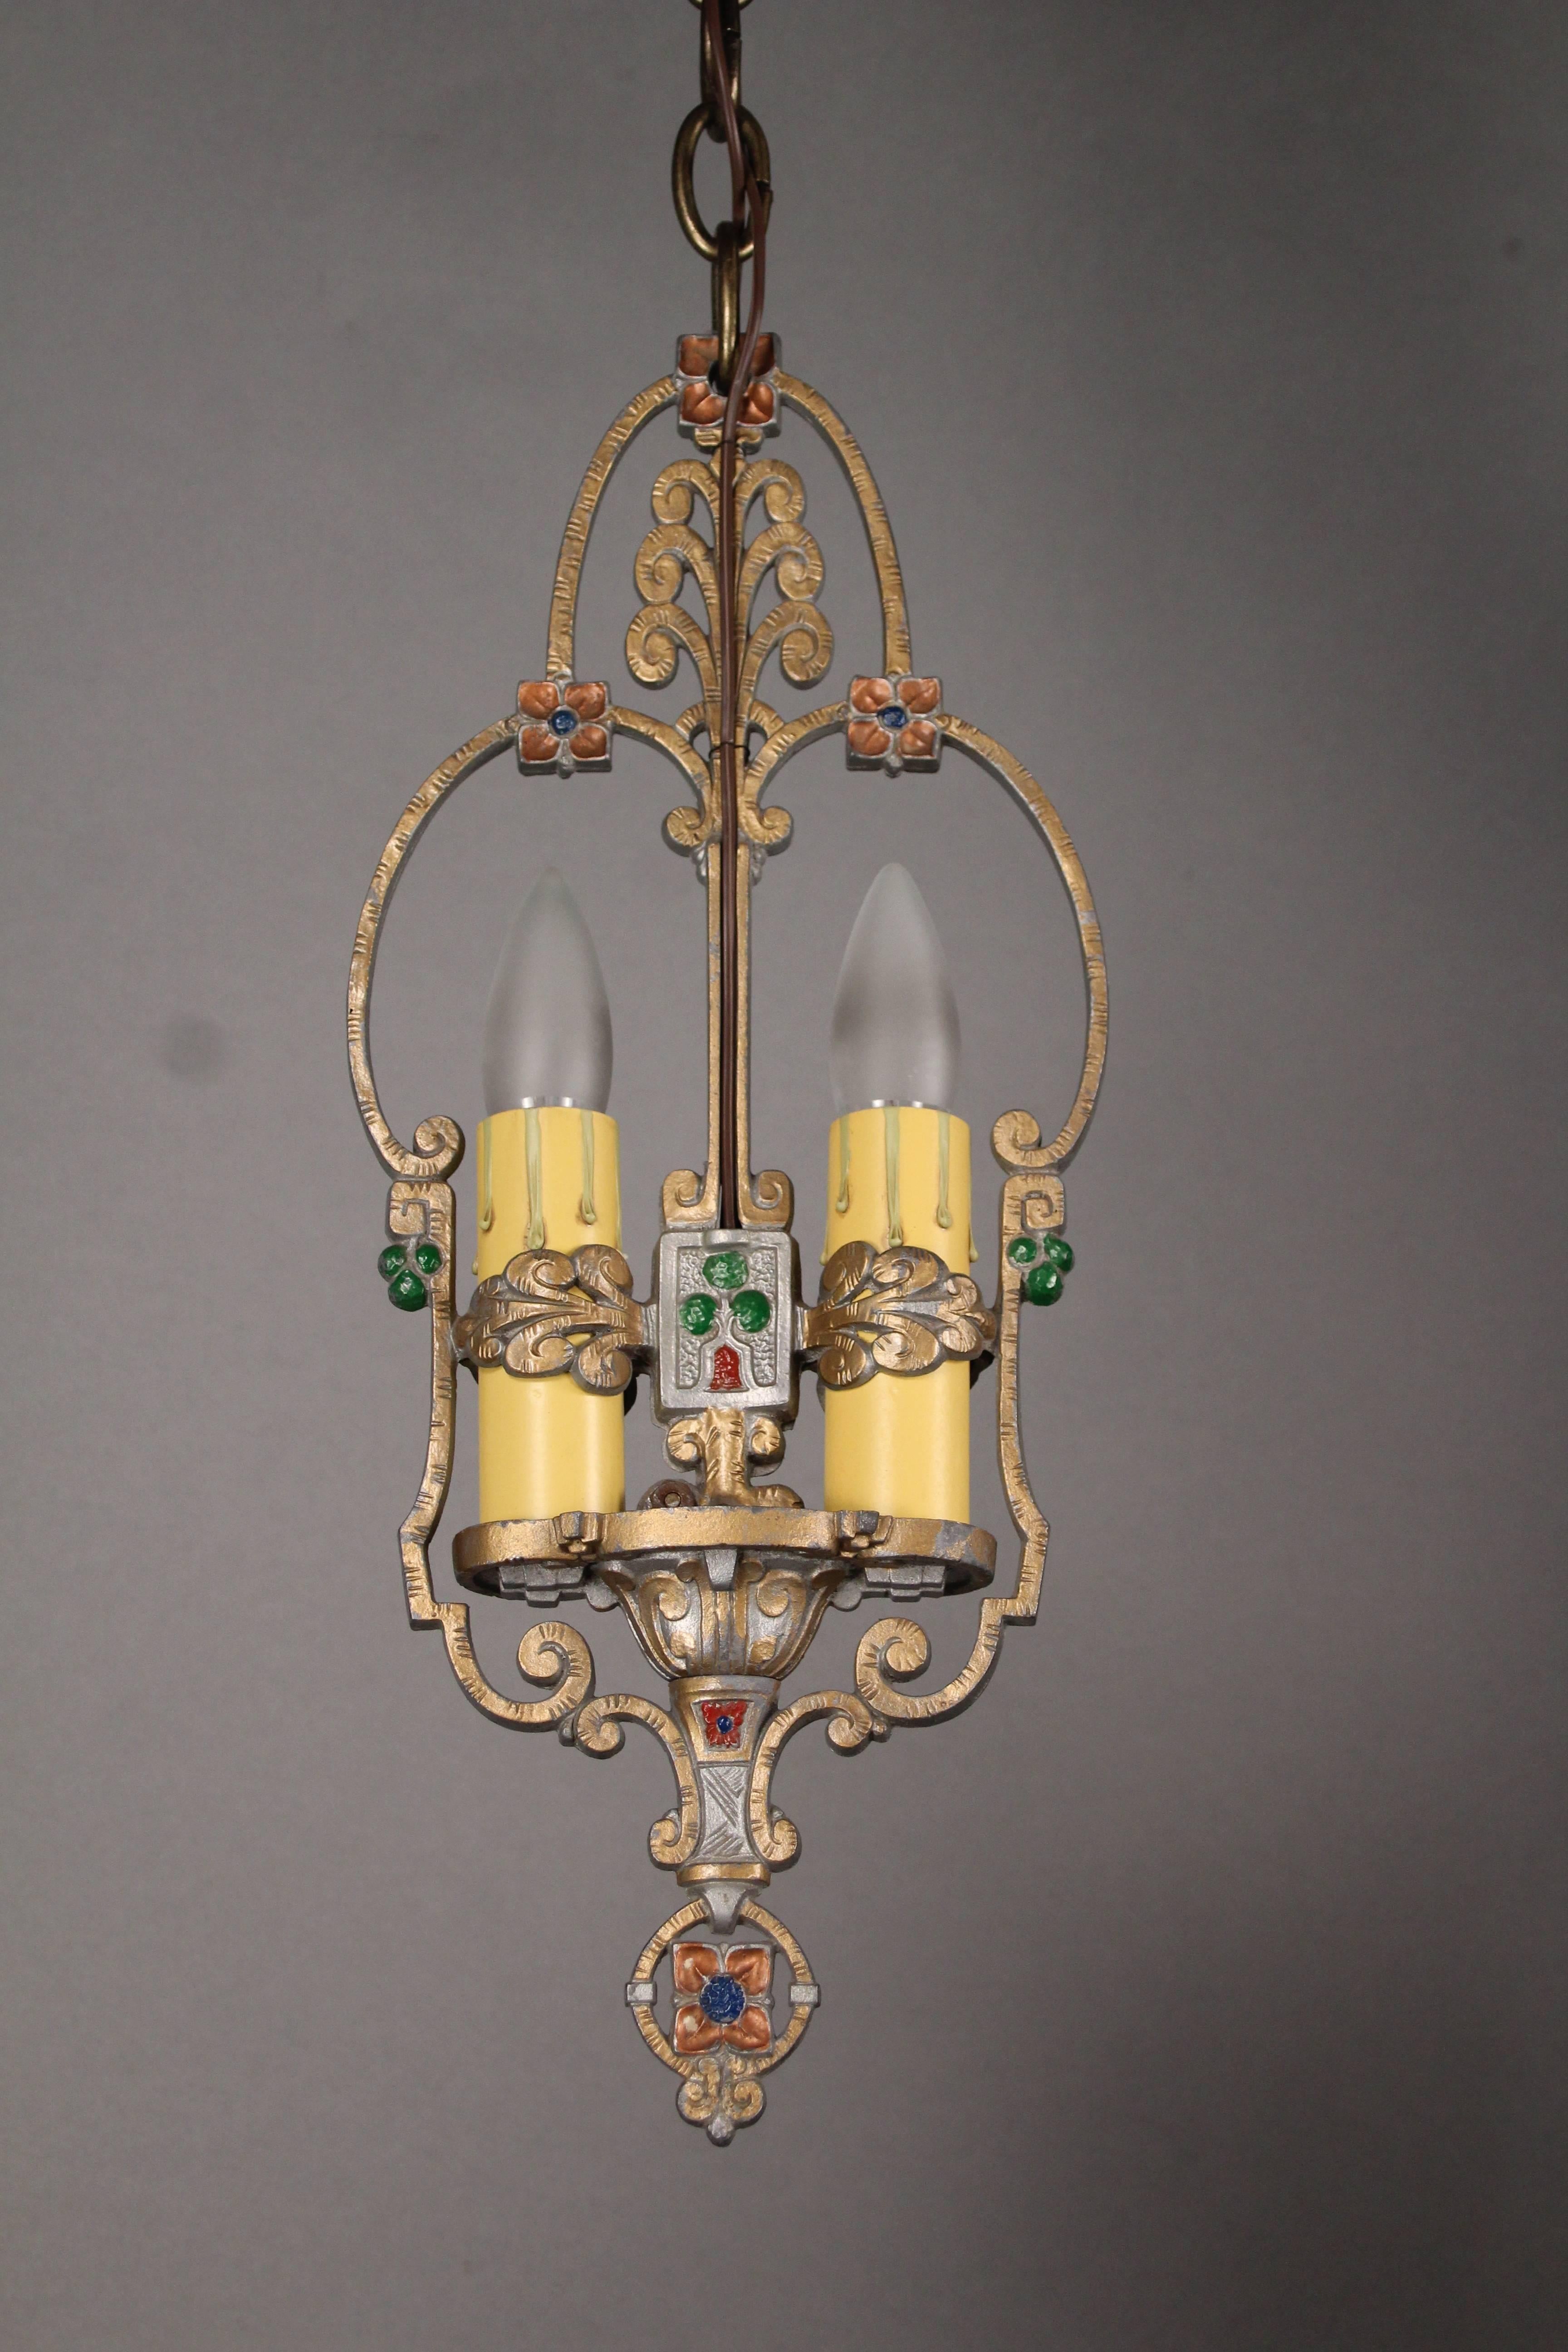 North American Antique 1920s Polychrome Two-Light Pendant Light with Clover Motif